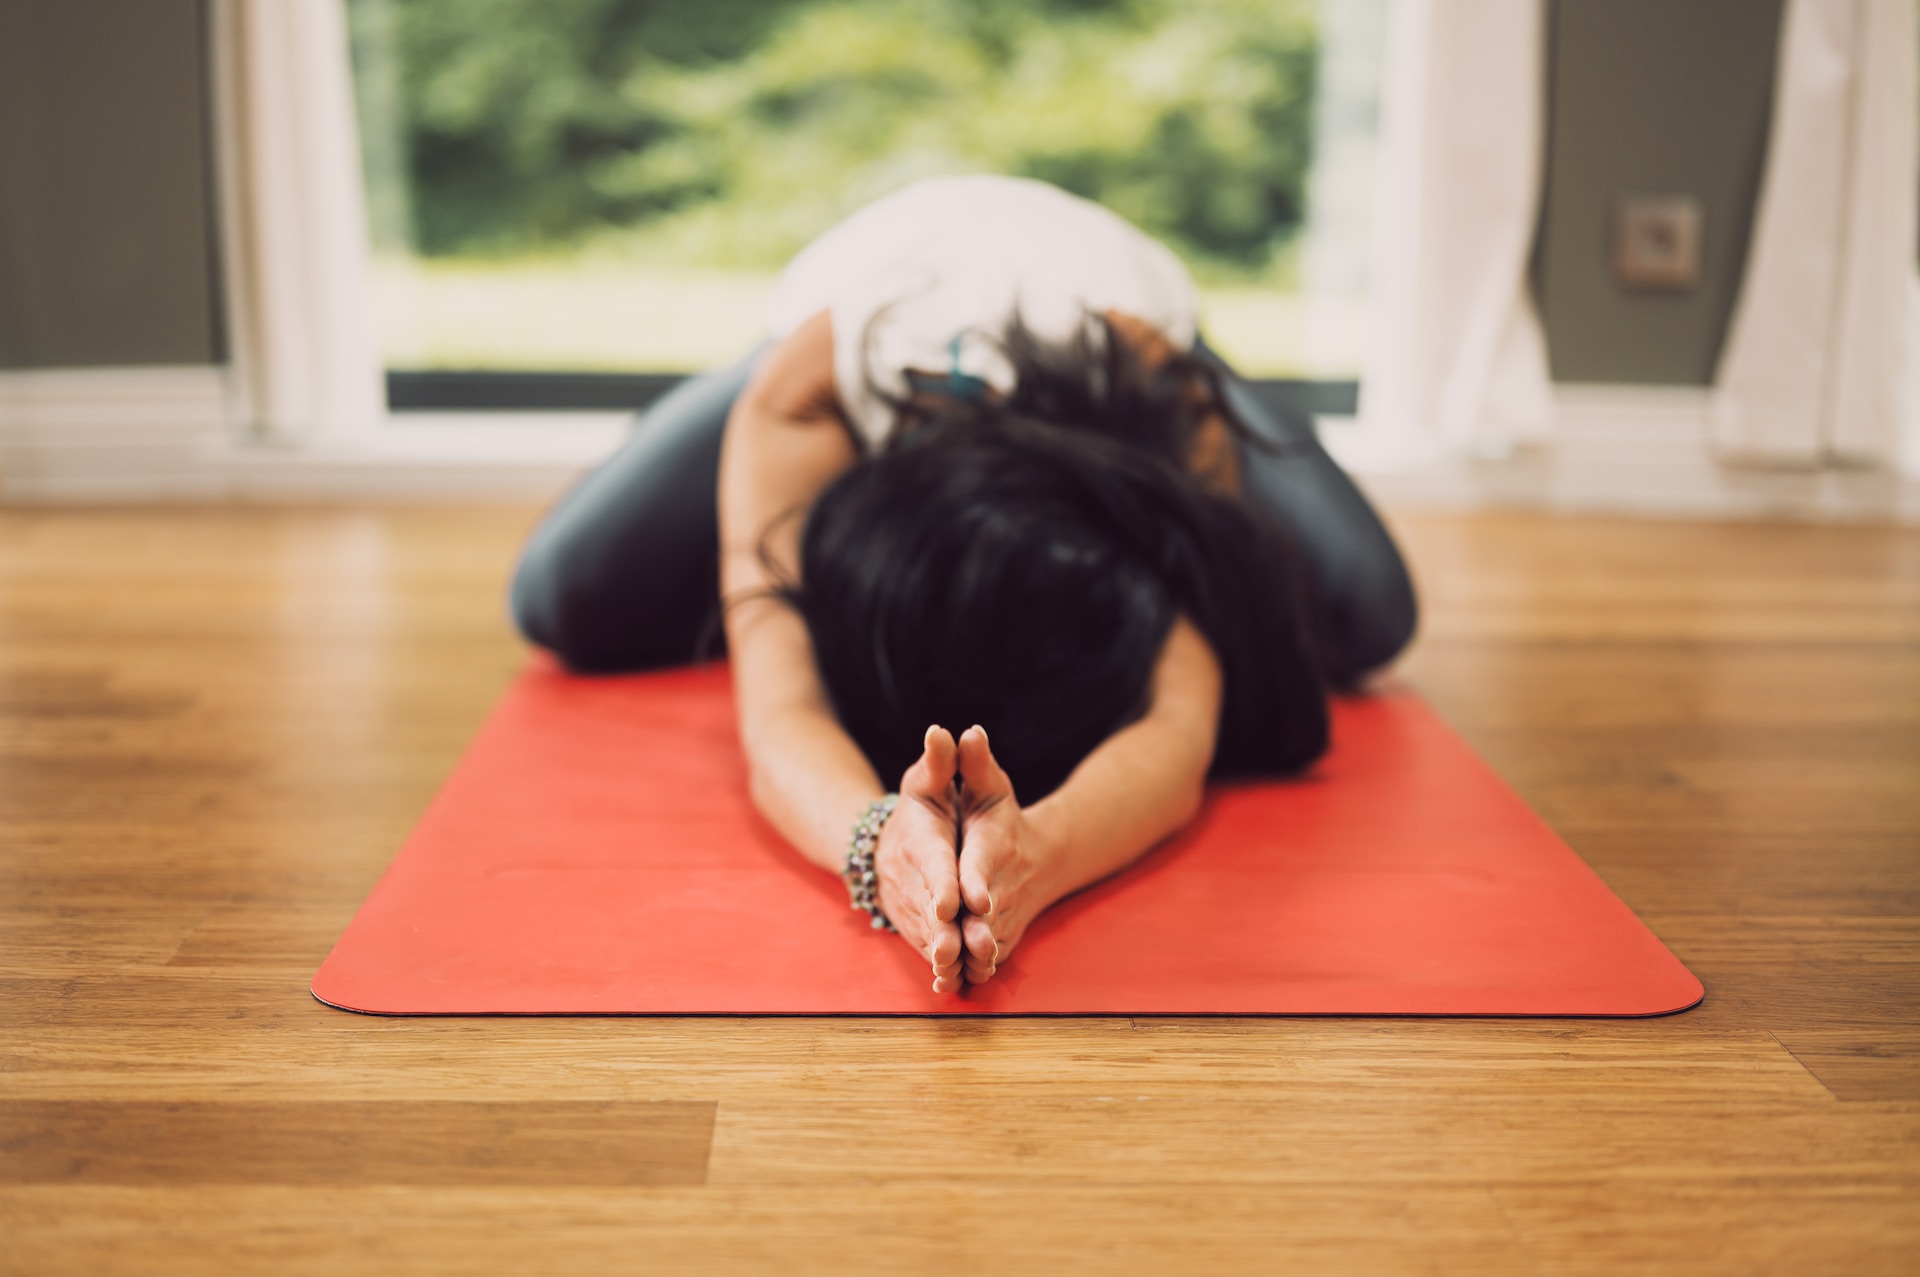 A woman doing a child yoga pose on a red yoga mat